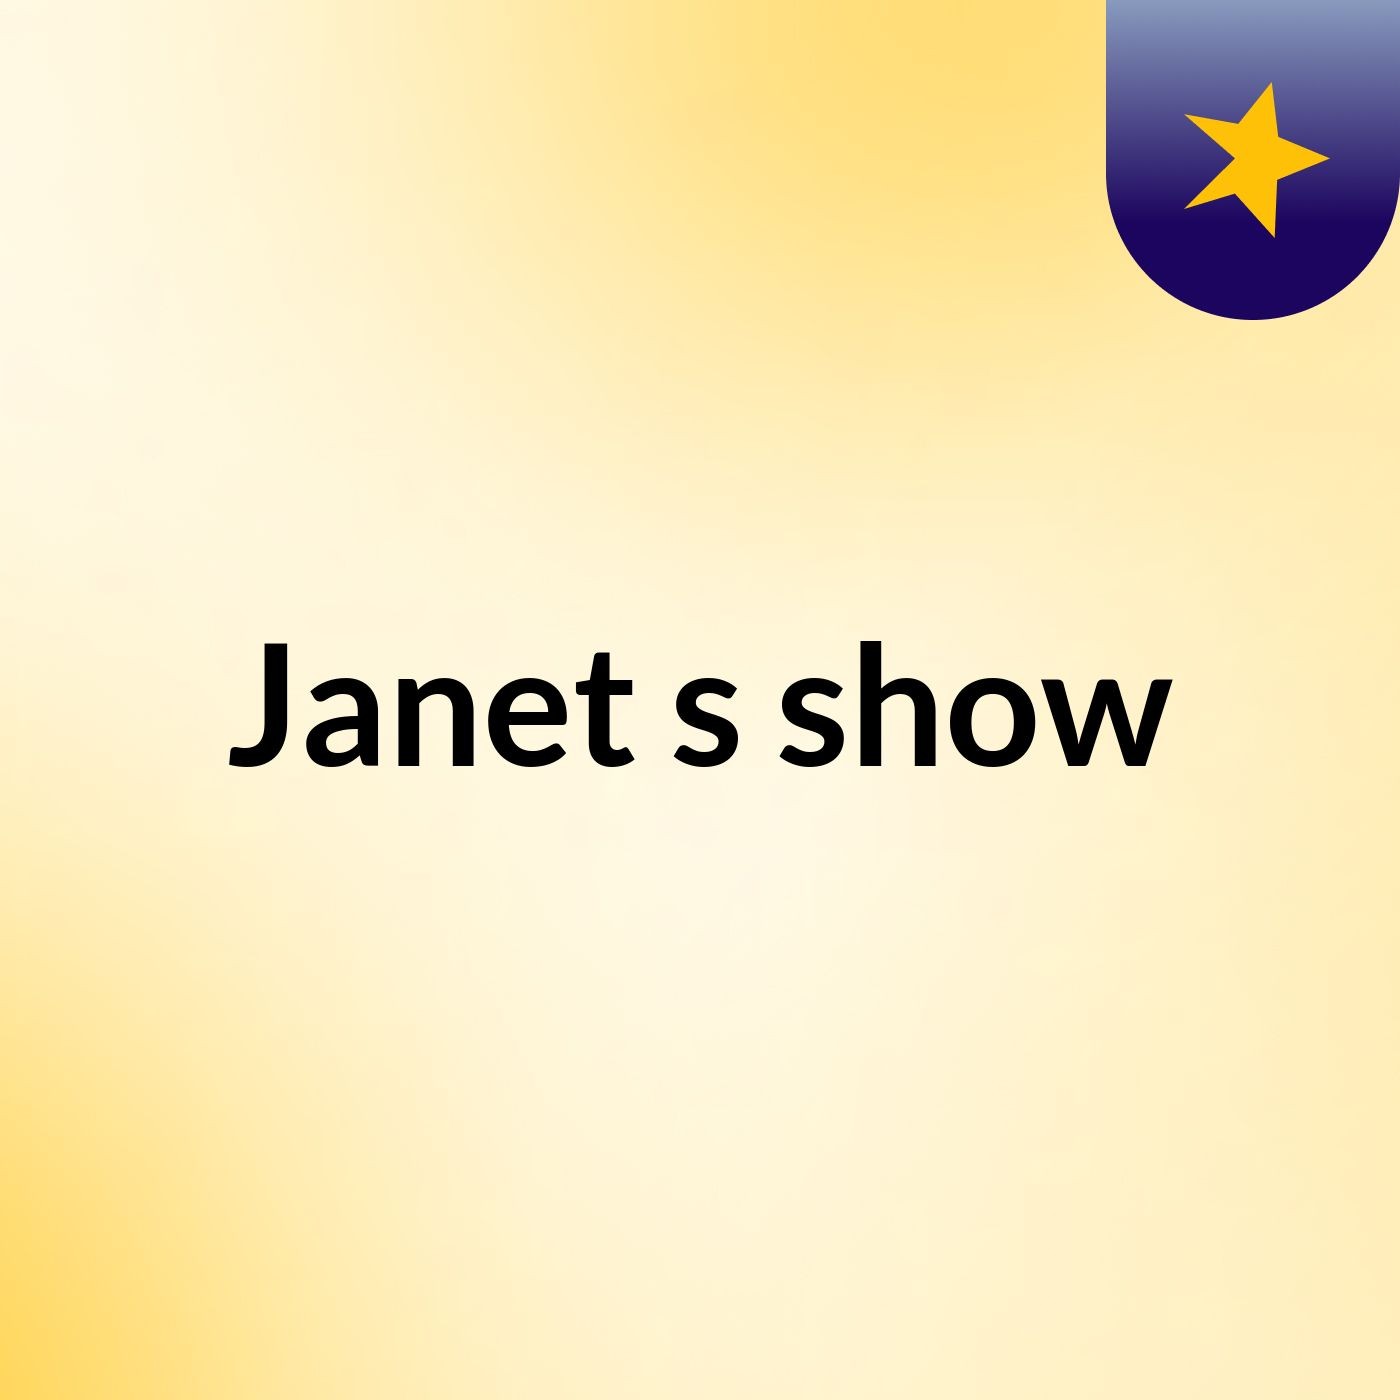 Janet's show